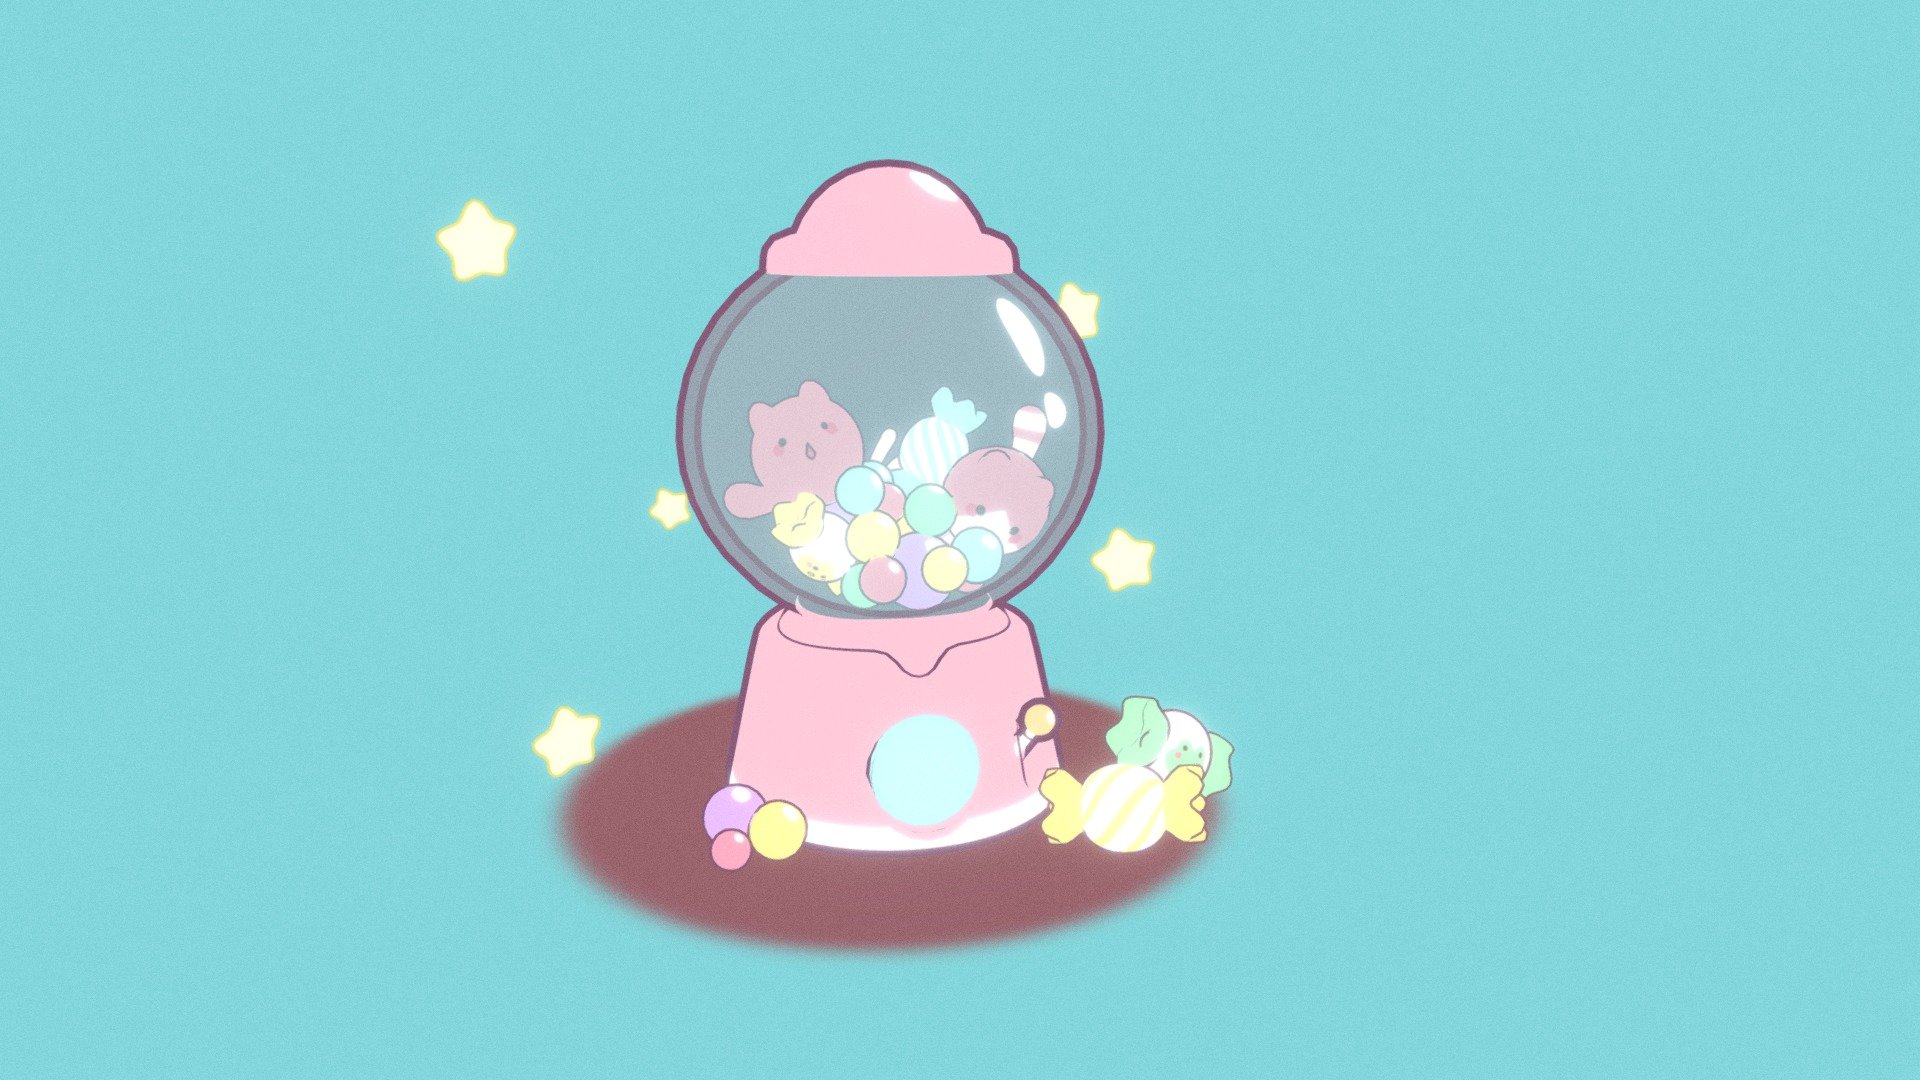 Inspired by: https://www.pinterest.es/pin/133771051422255245/
UwU - Kawaii Gumball Machine - Download Free 3D model by MariaDiazLabella (@ItsMira) 3d model